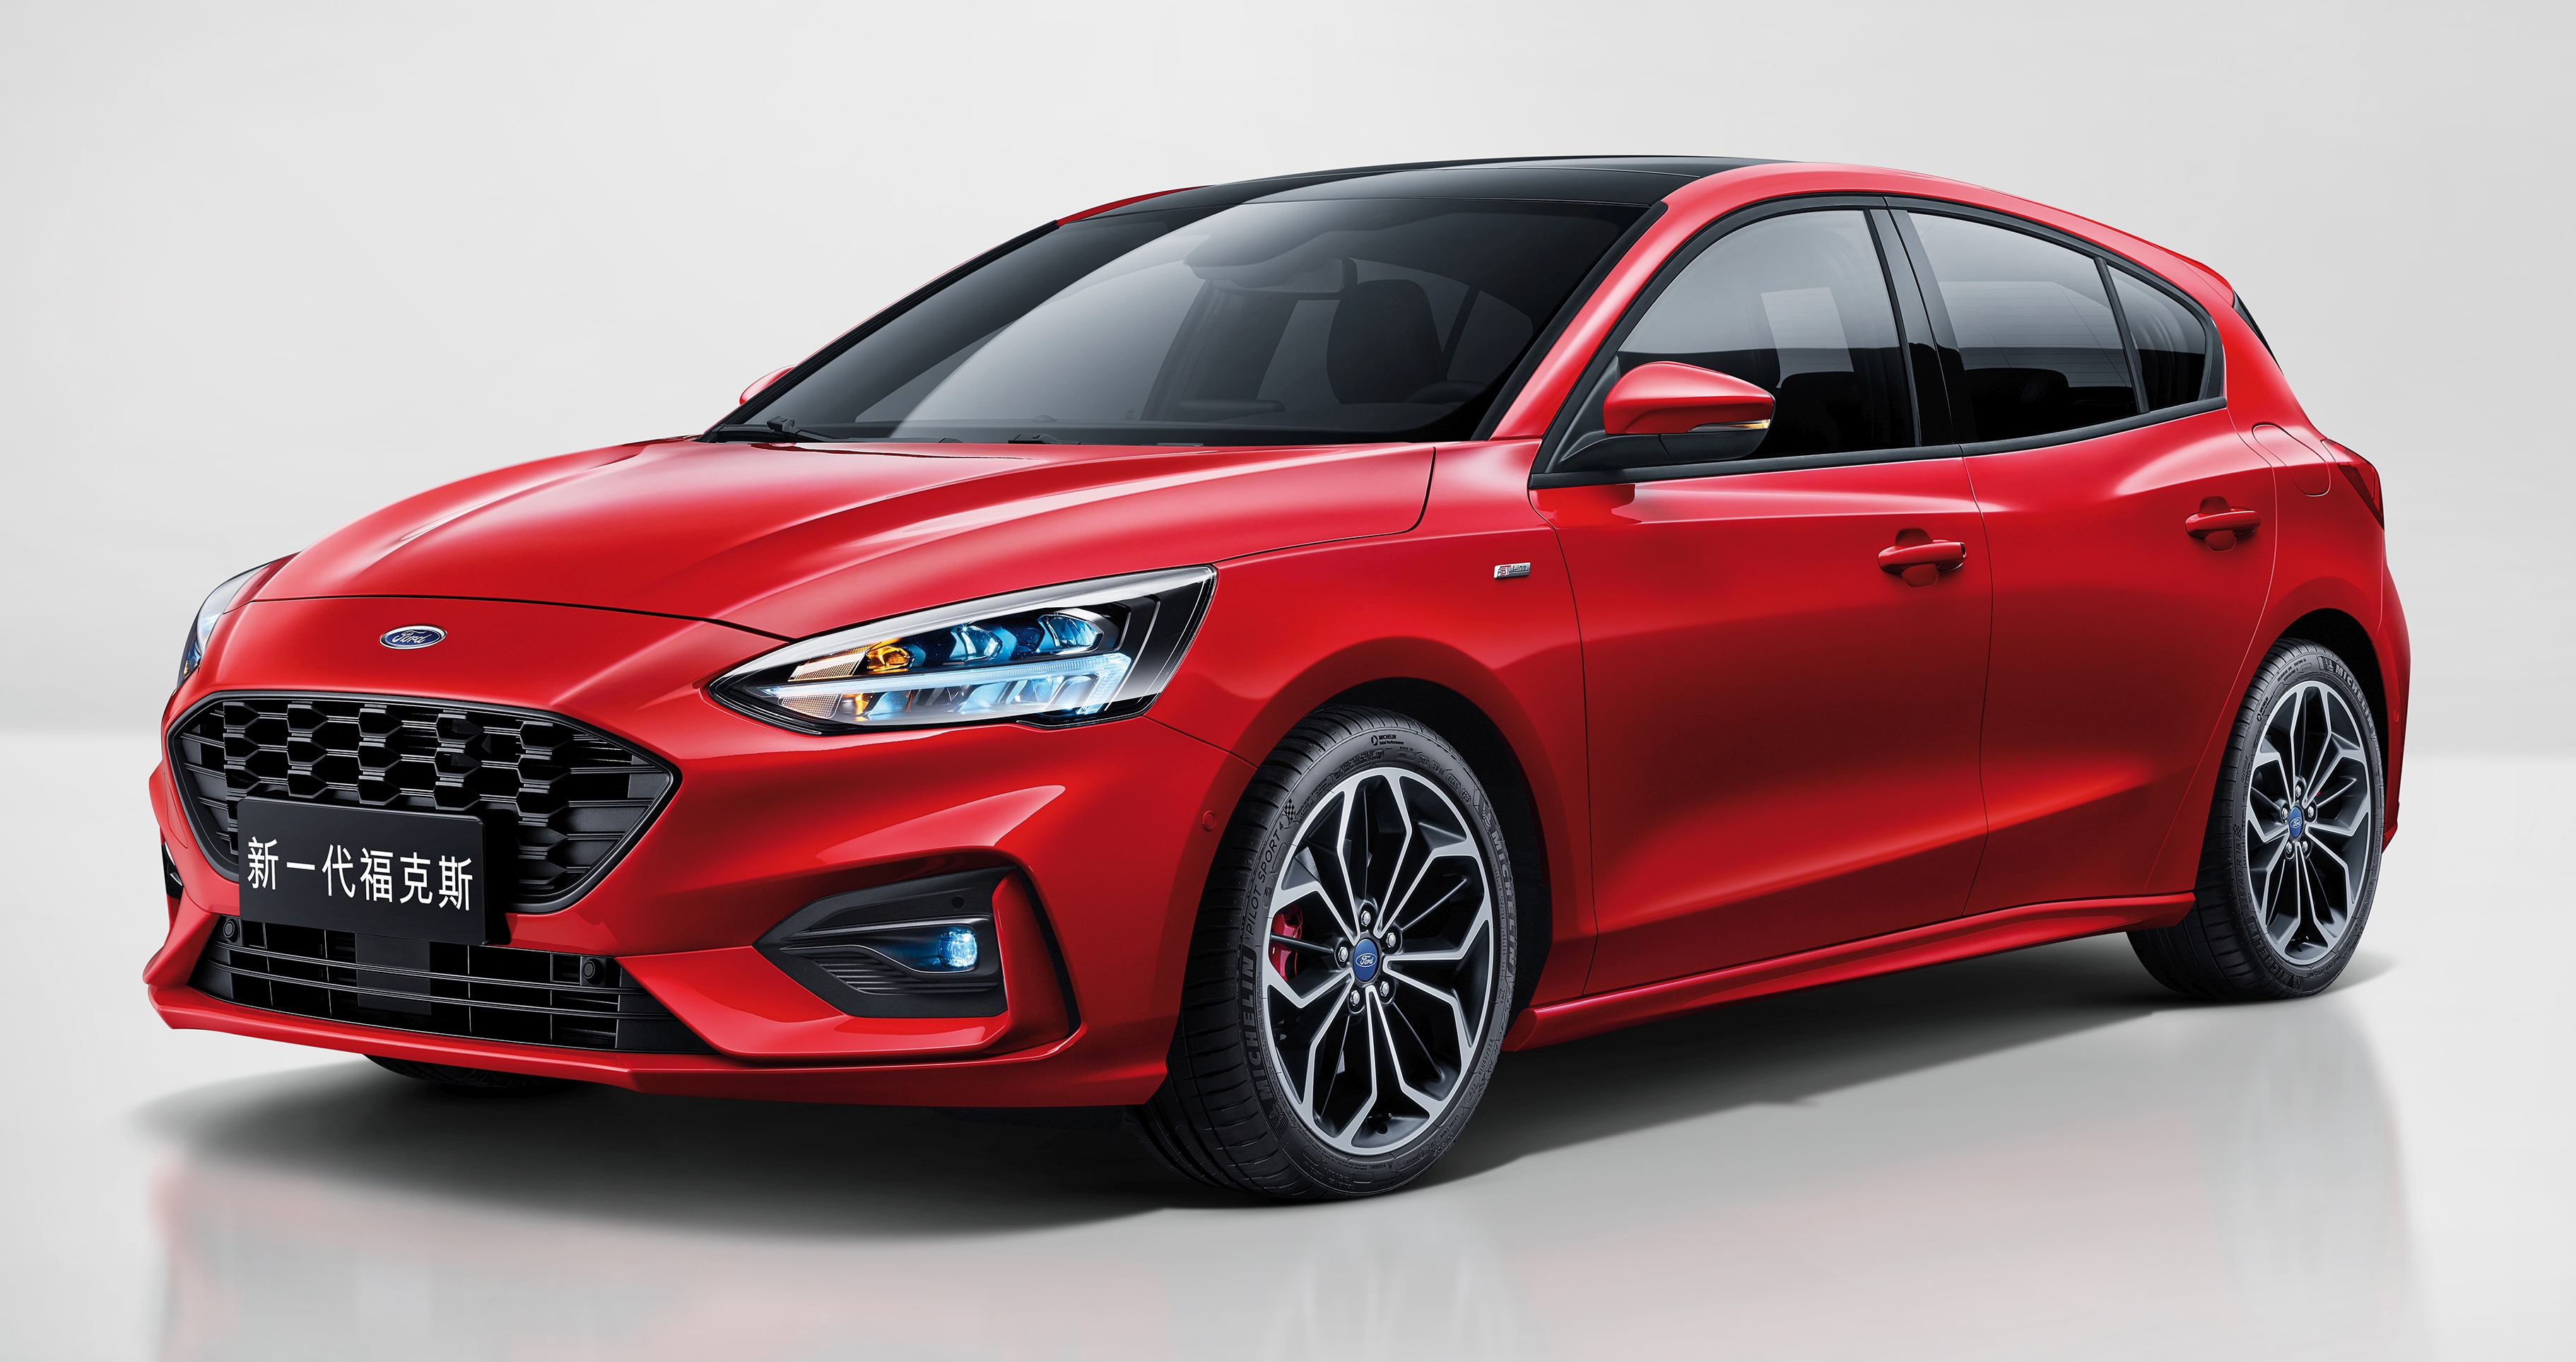 New Ford Focus Mk4 won't be made, sold in Thailand 